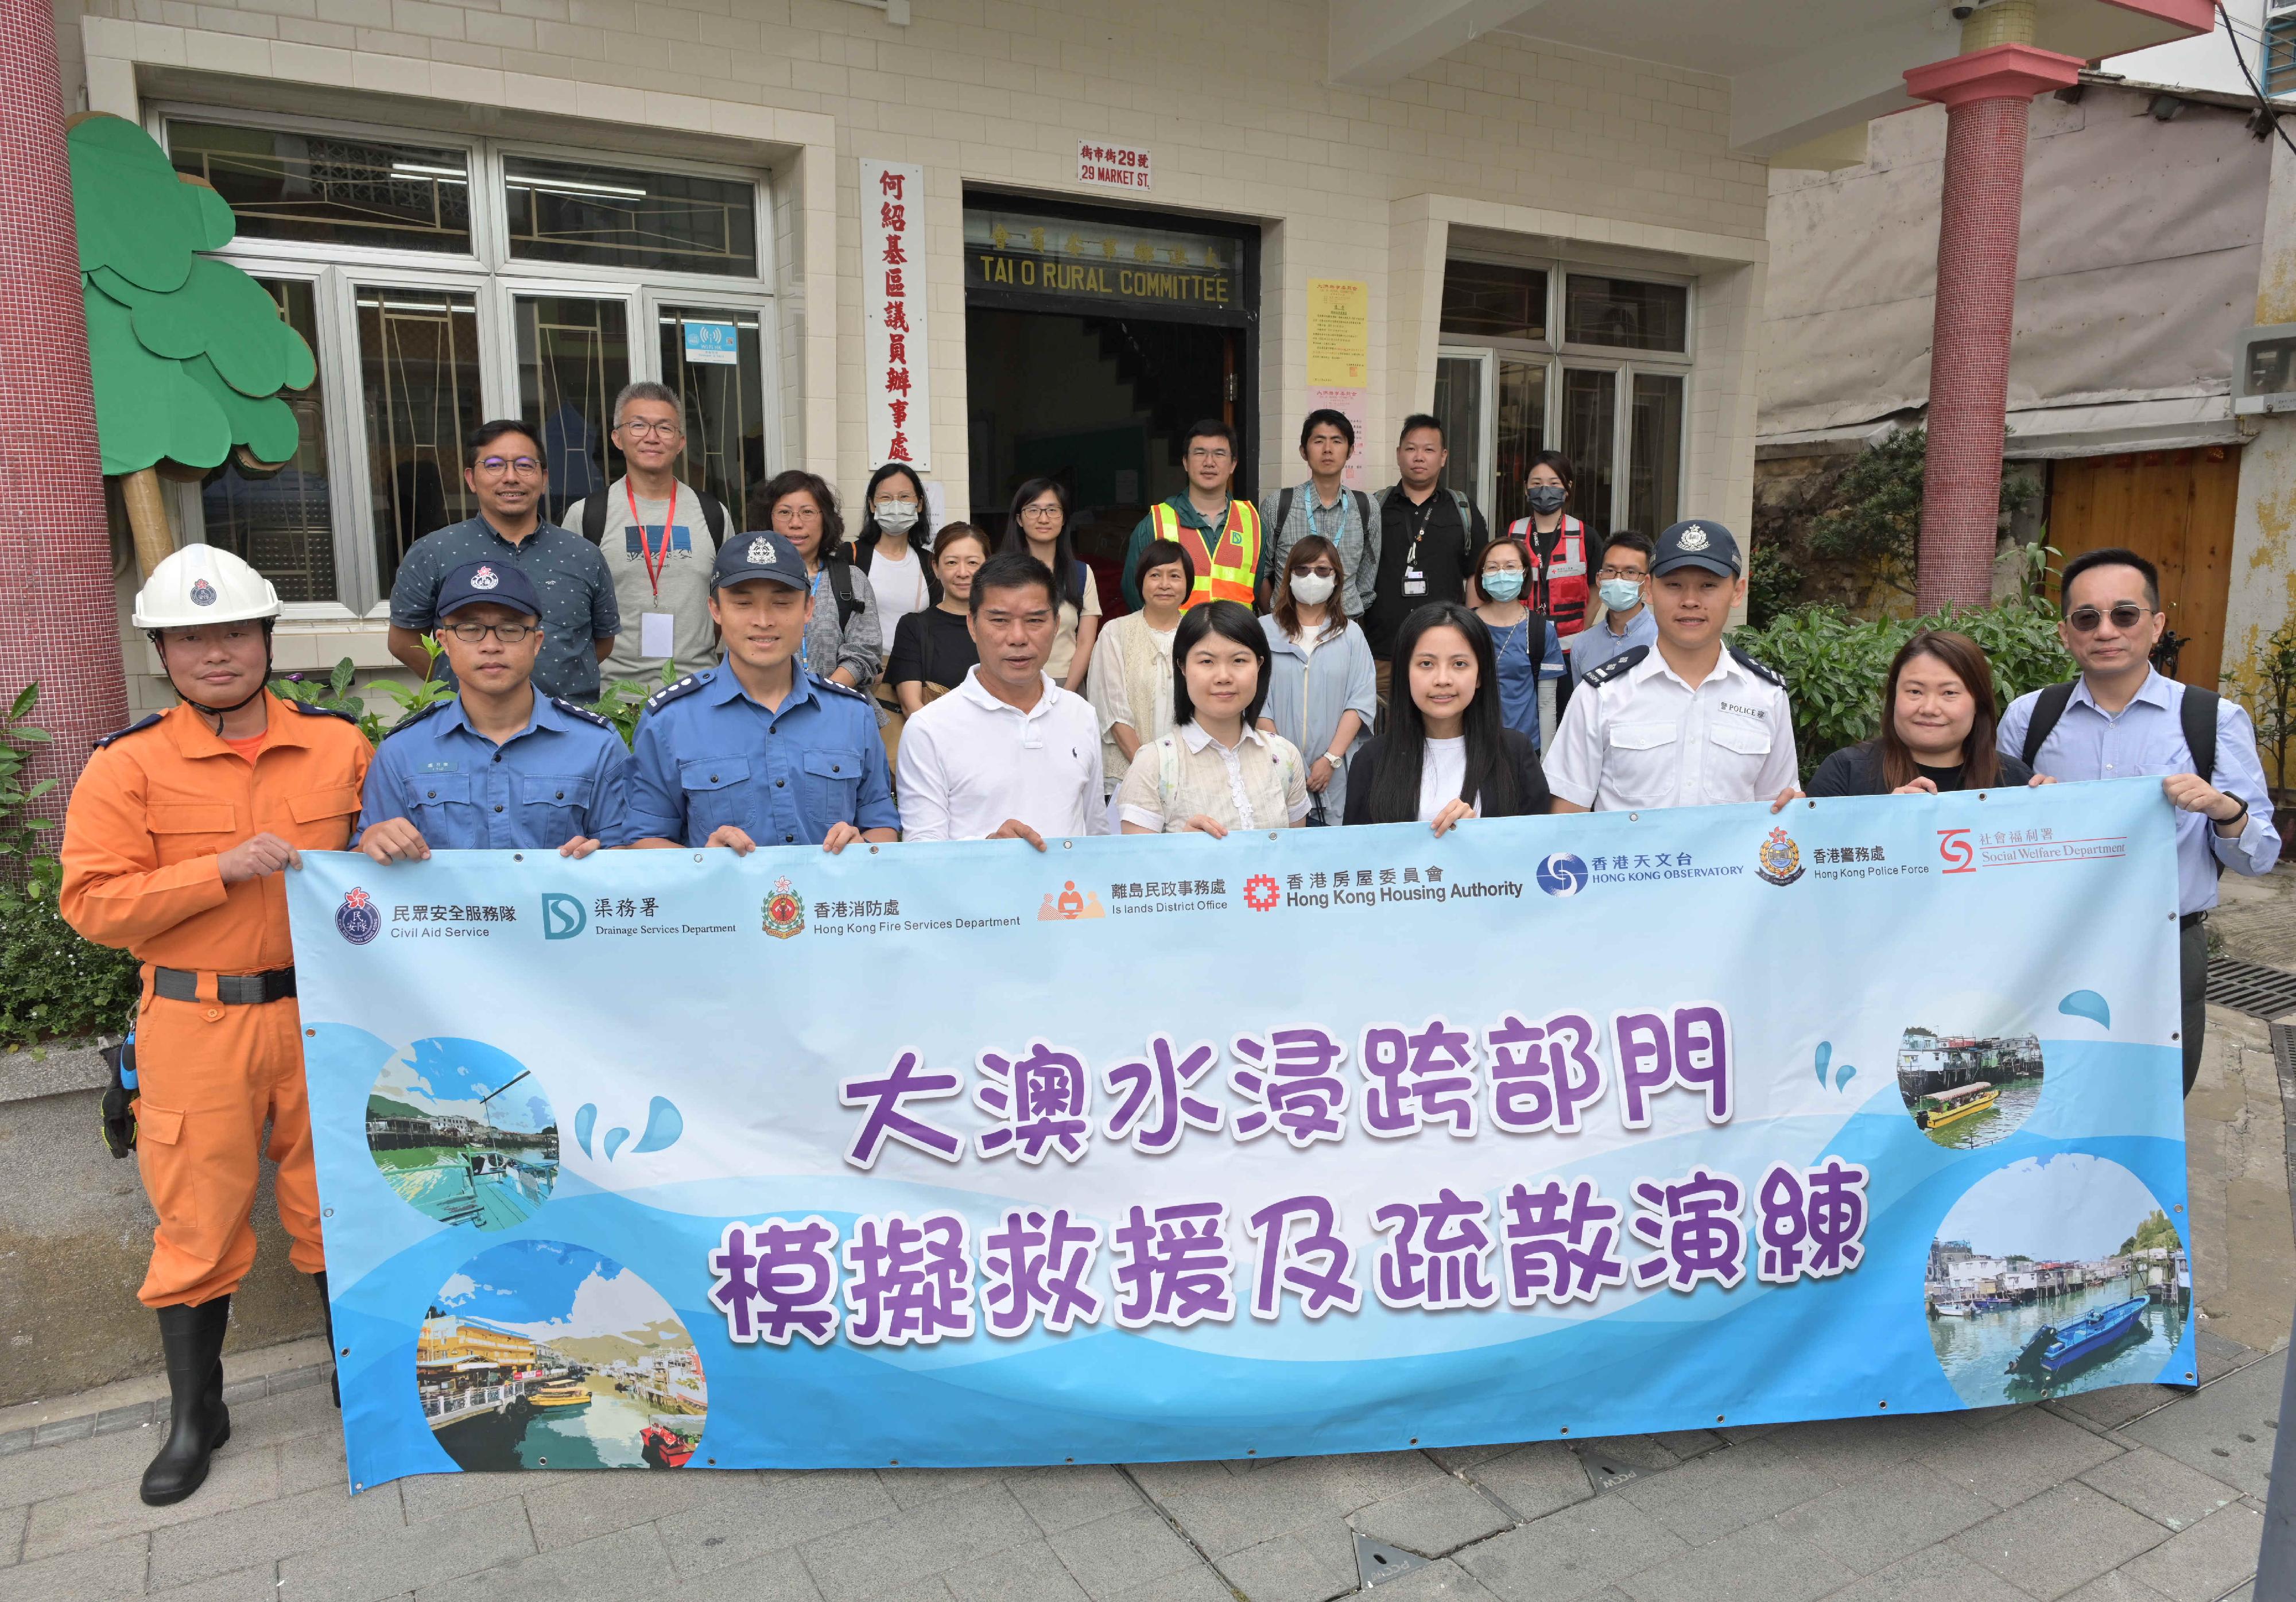 The Islands District Office conducted an inter-departmental rescue and evacuation drill in the event of flooding in Tai O today (May 10). Photo shows staff members of the Islands District Office and representatives from participating departments and organisations after the drill.